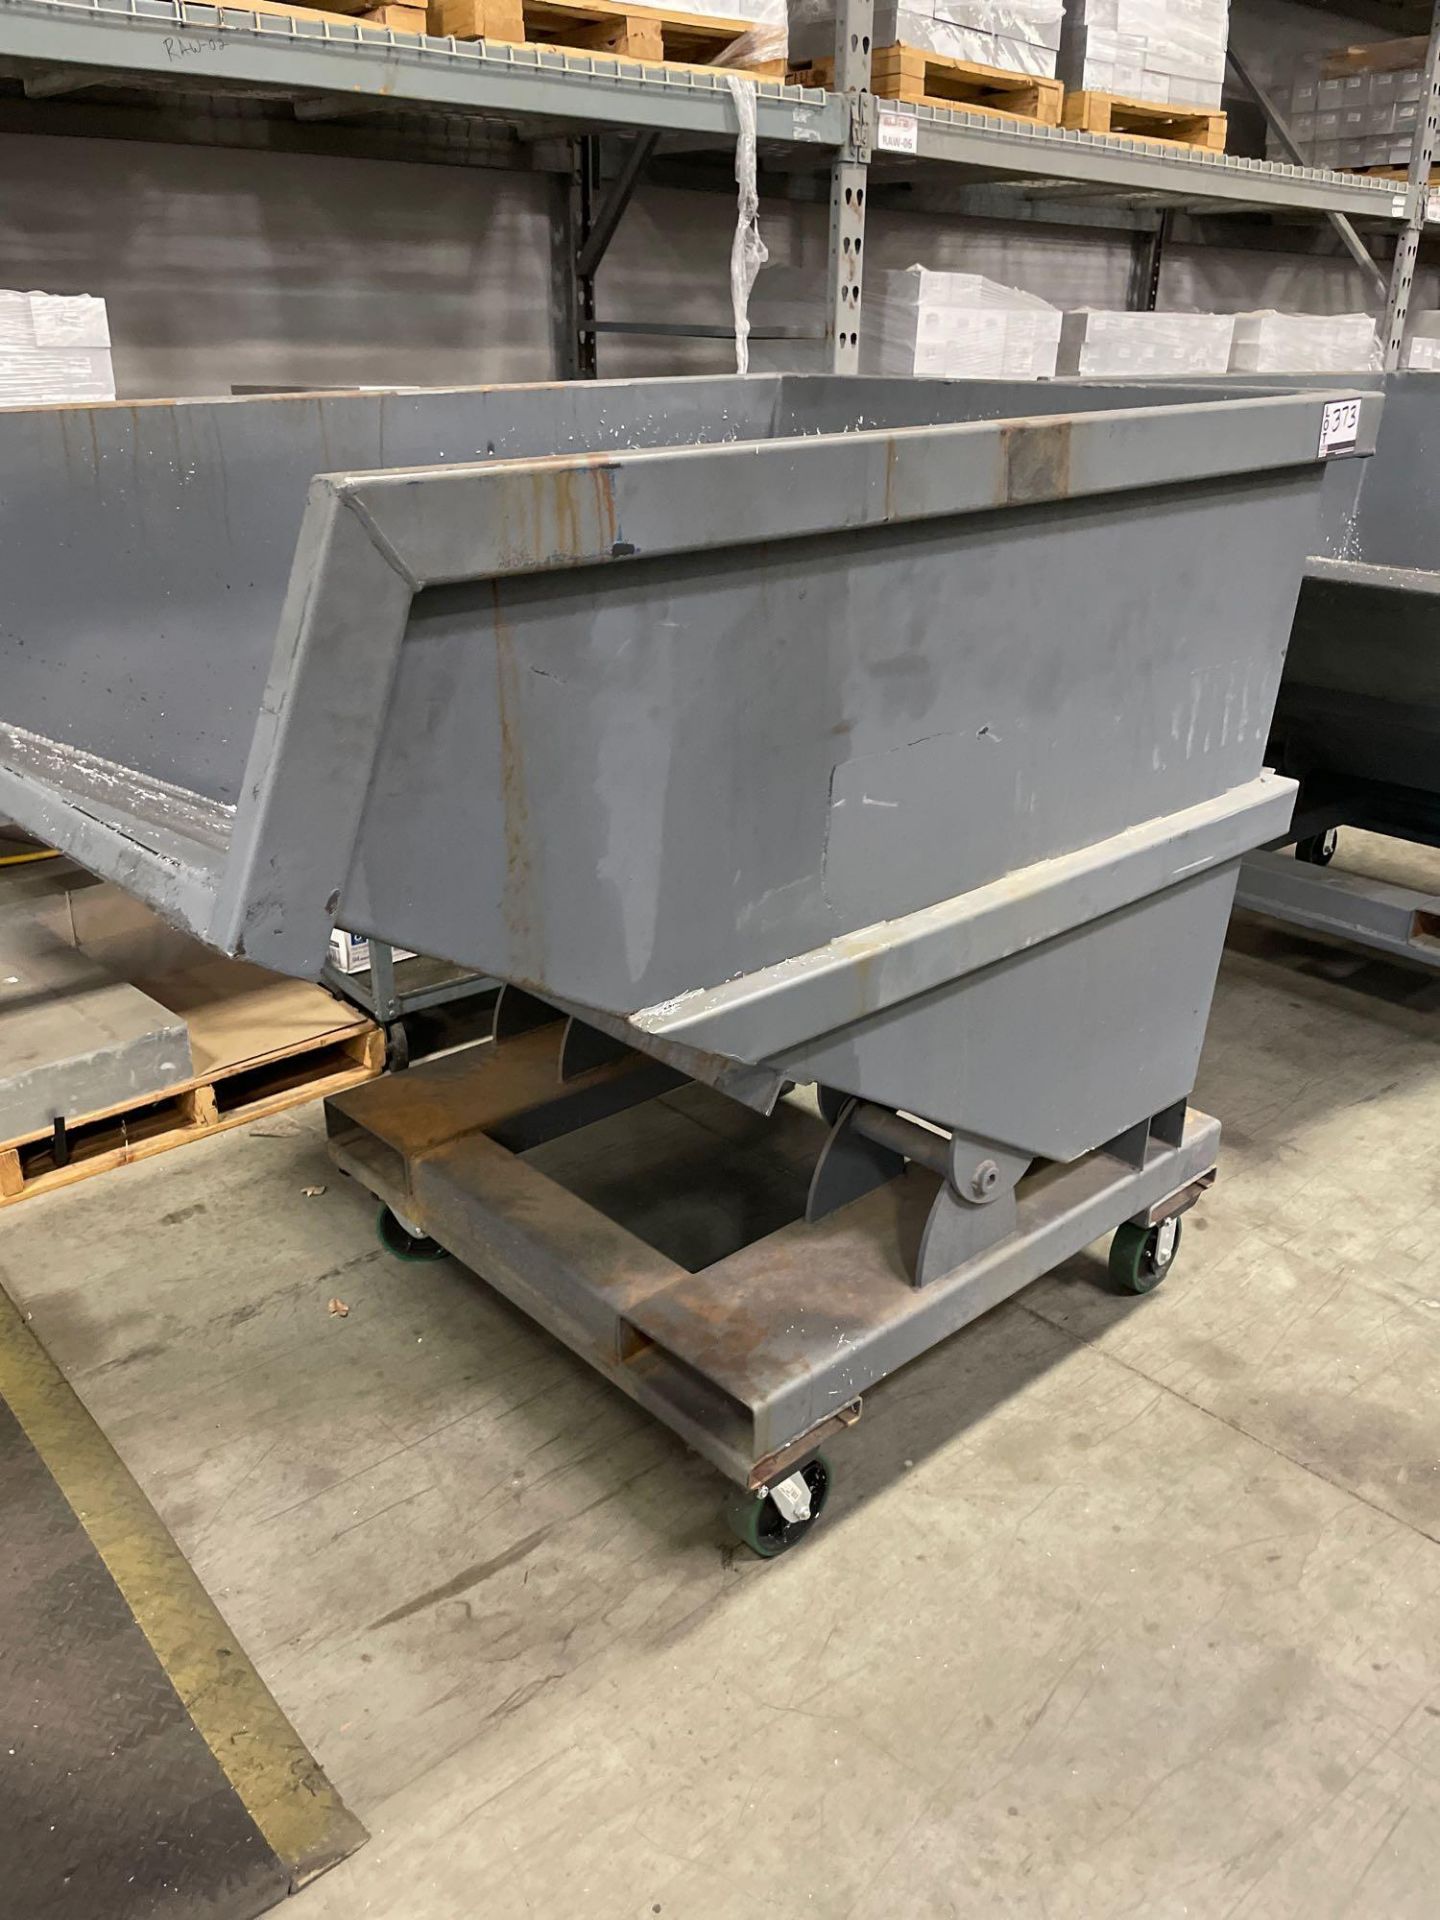 42" x 64" x 40" Dumping Hopper on Casters - Image 4 of 5